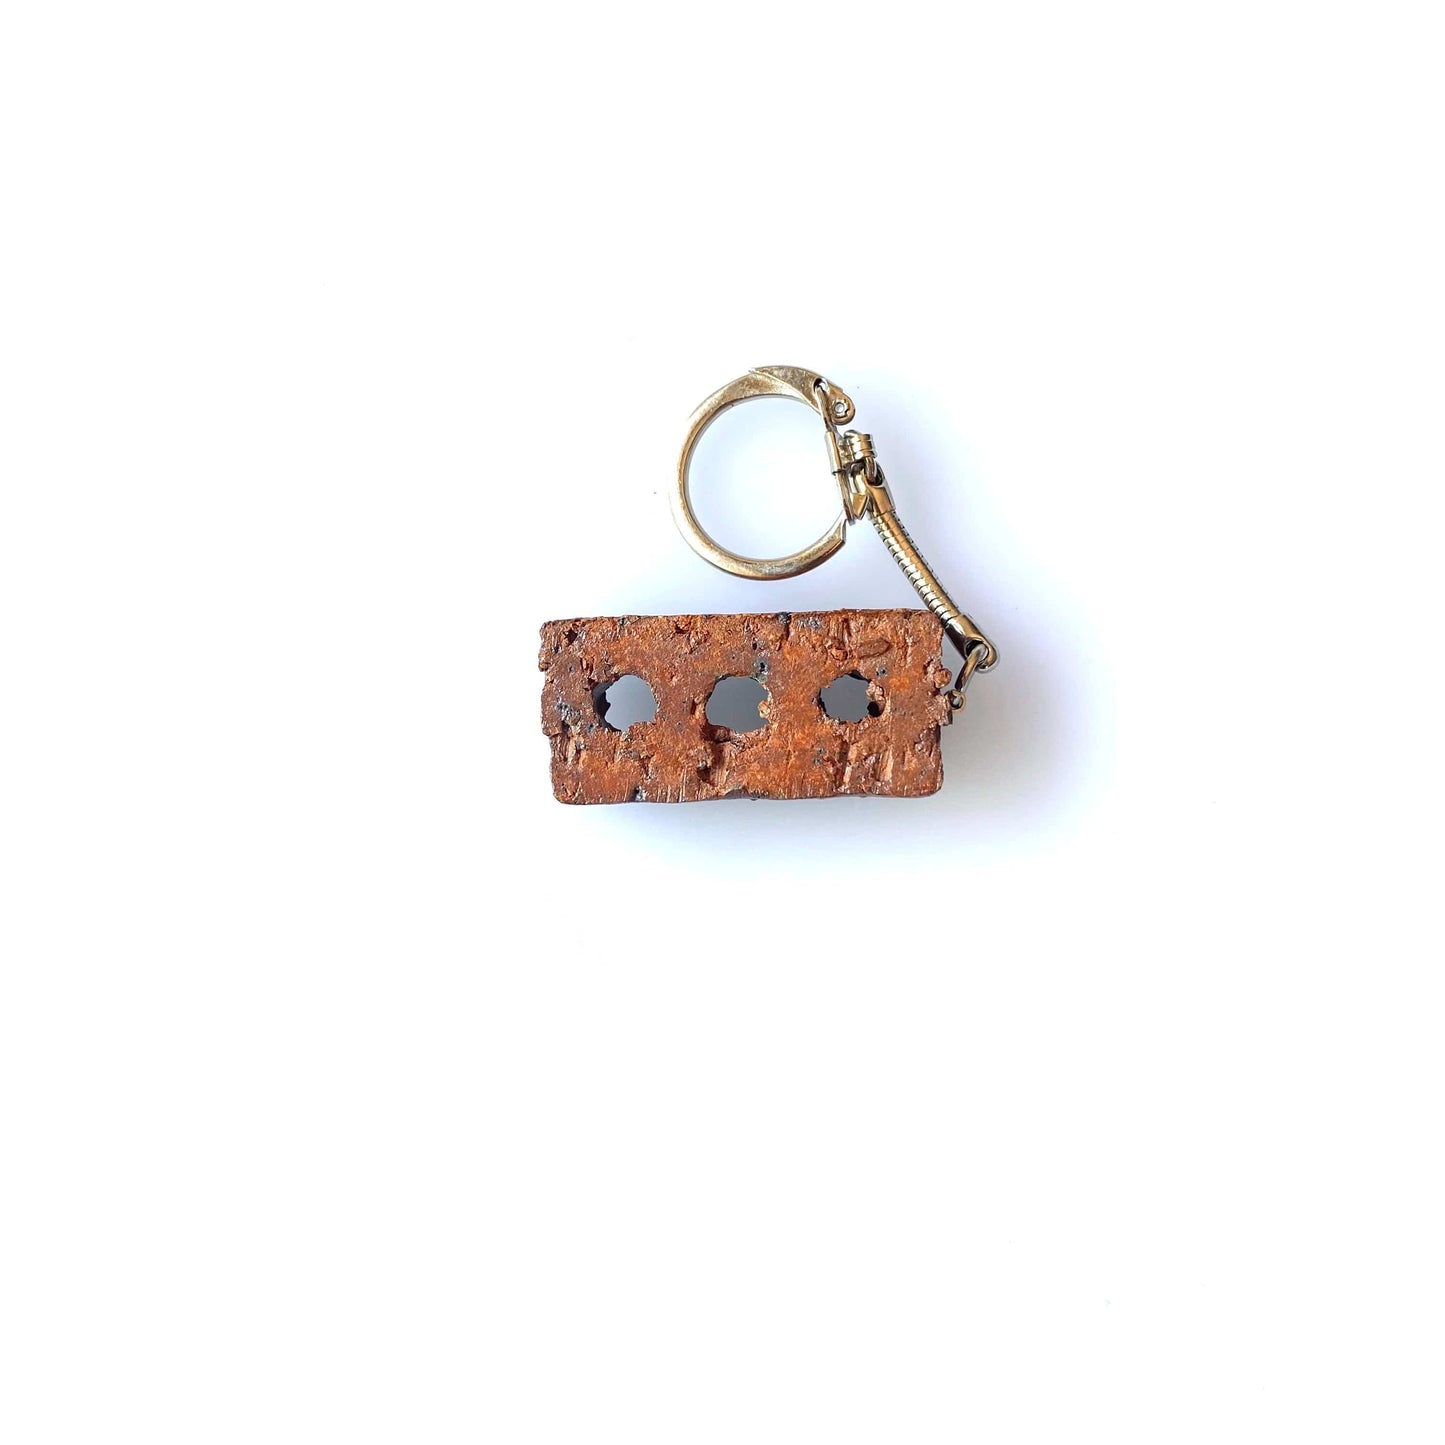 Vintage Endicott Clay Products Employee-Only Keychain Key Ring